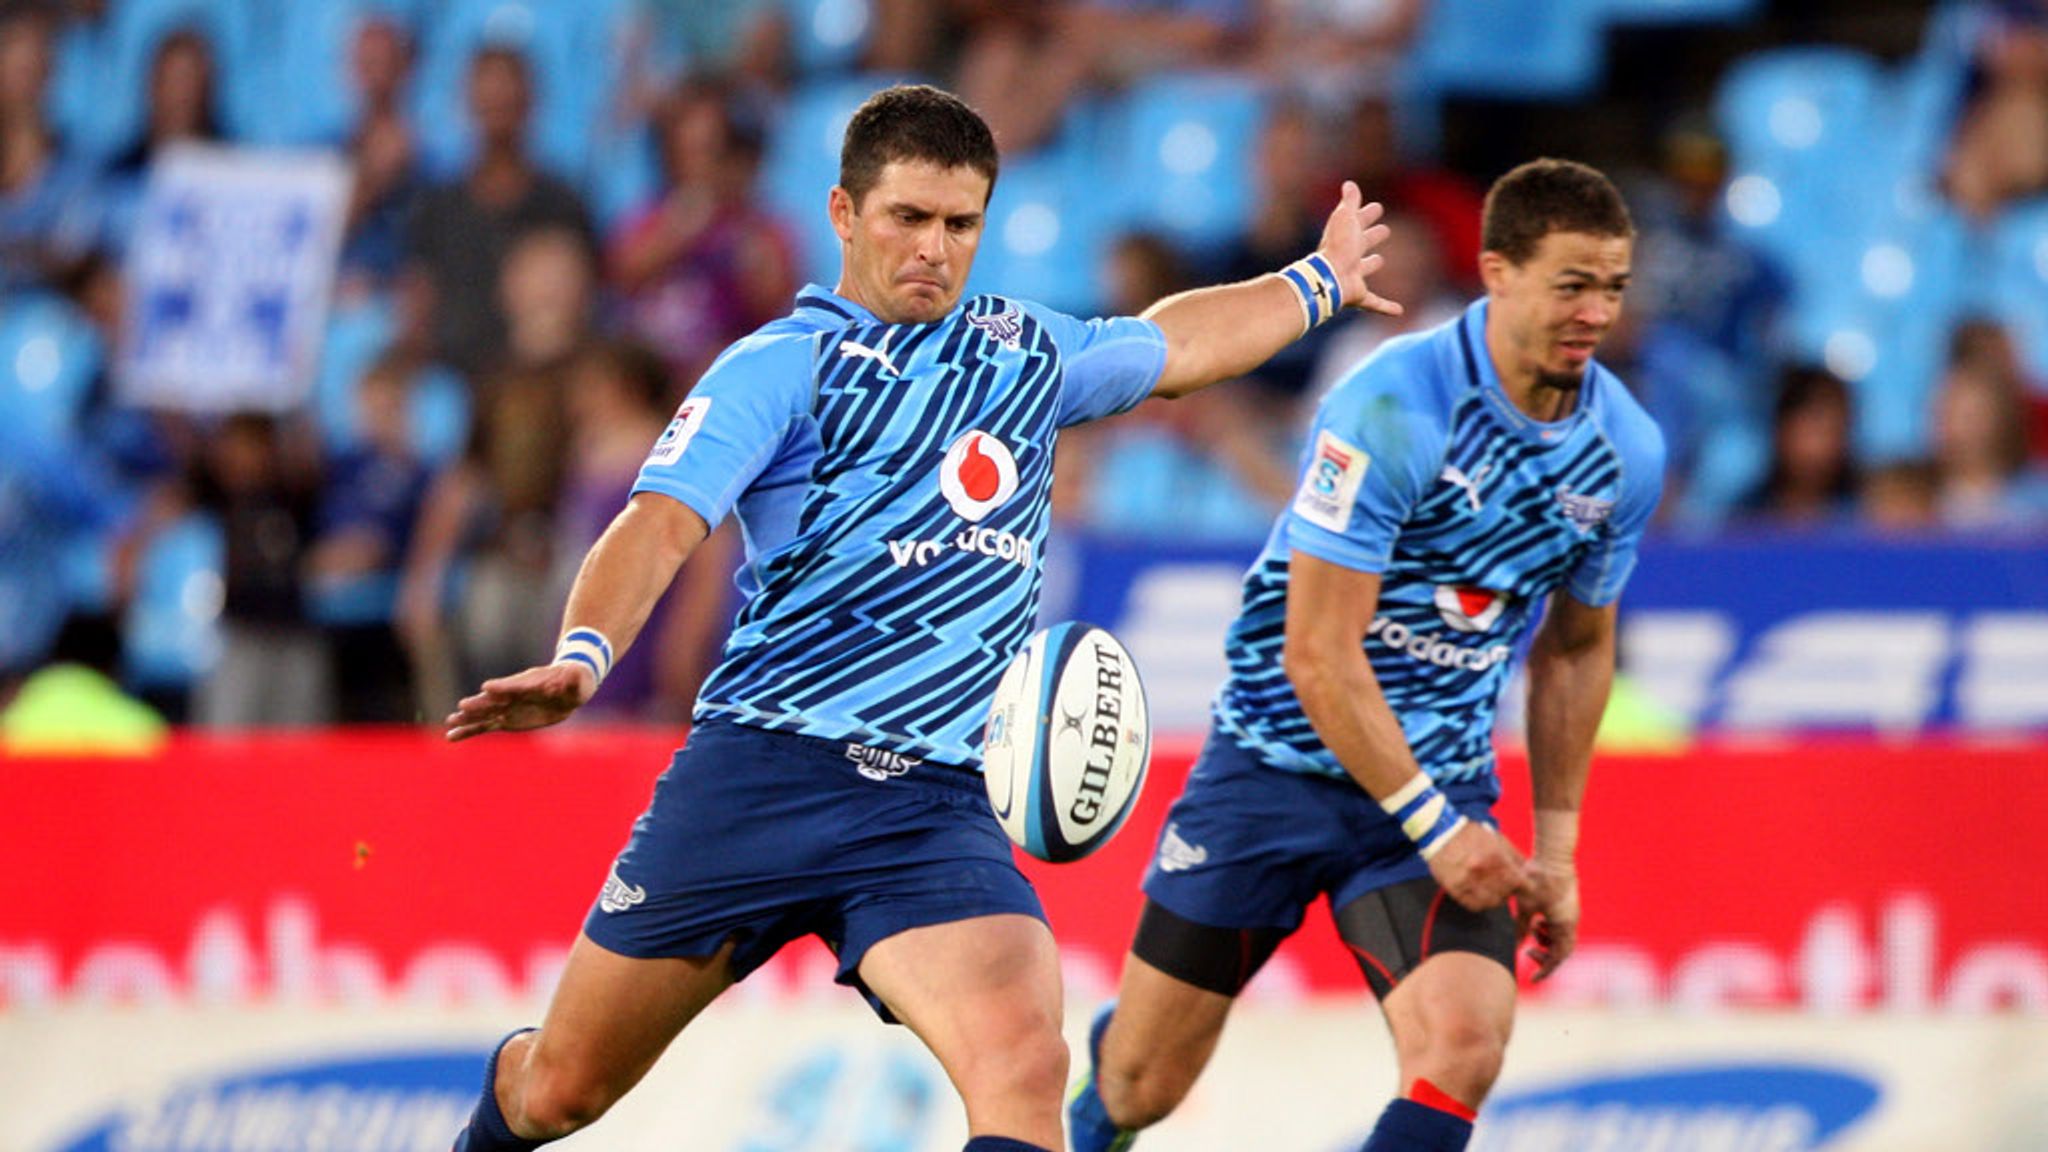 Super Rugby Morne Steyn stars as Bulls beat Stormers Rugby Union News Sky Sports